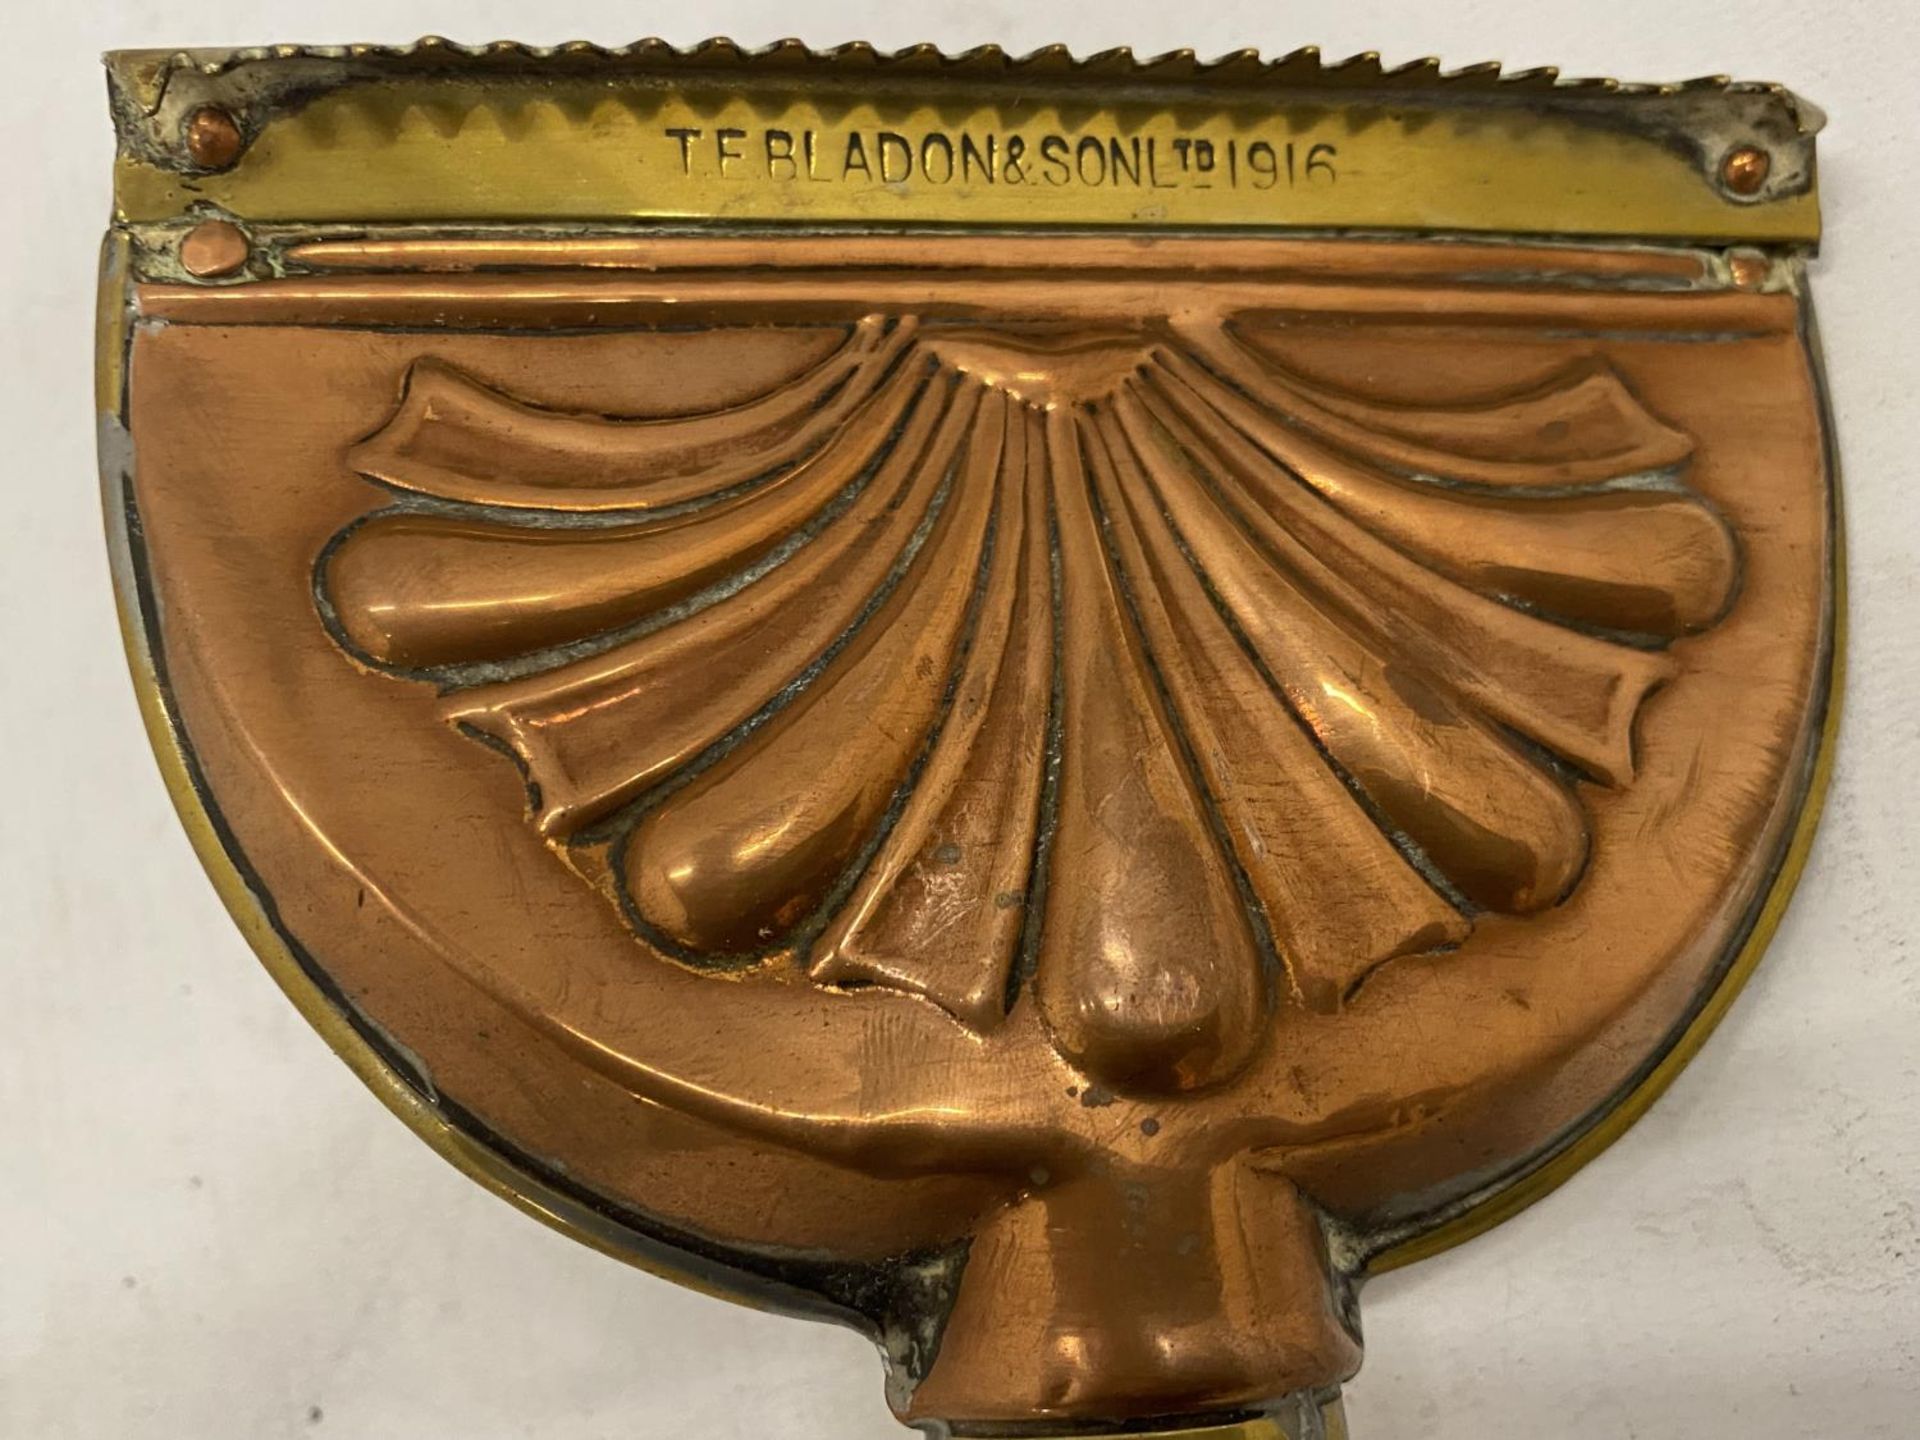 A VINTAGE BRASS AND COPPER CURRY COMB MARKED T E BLADON AND SON - Image 4 of 4